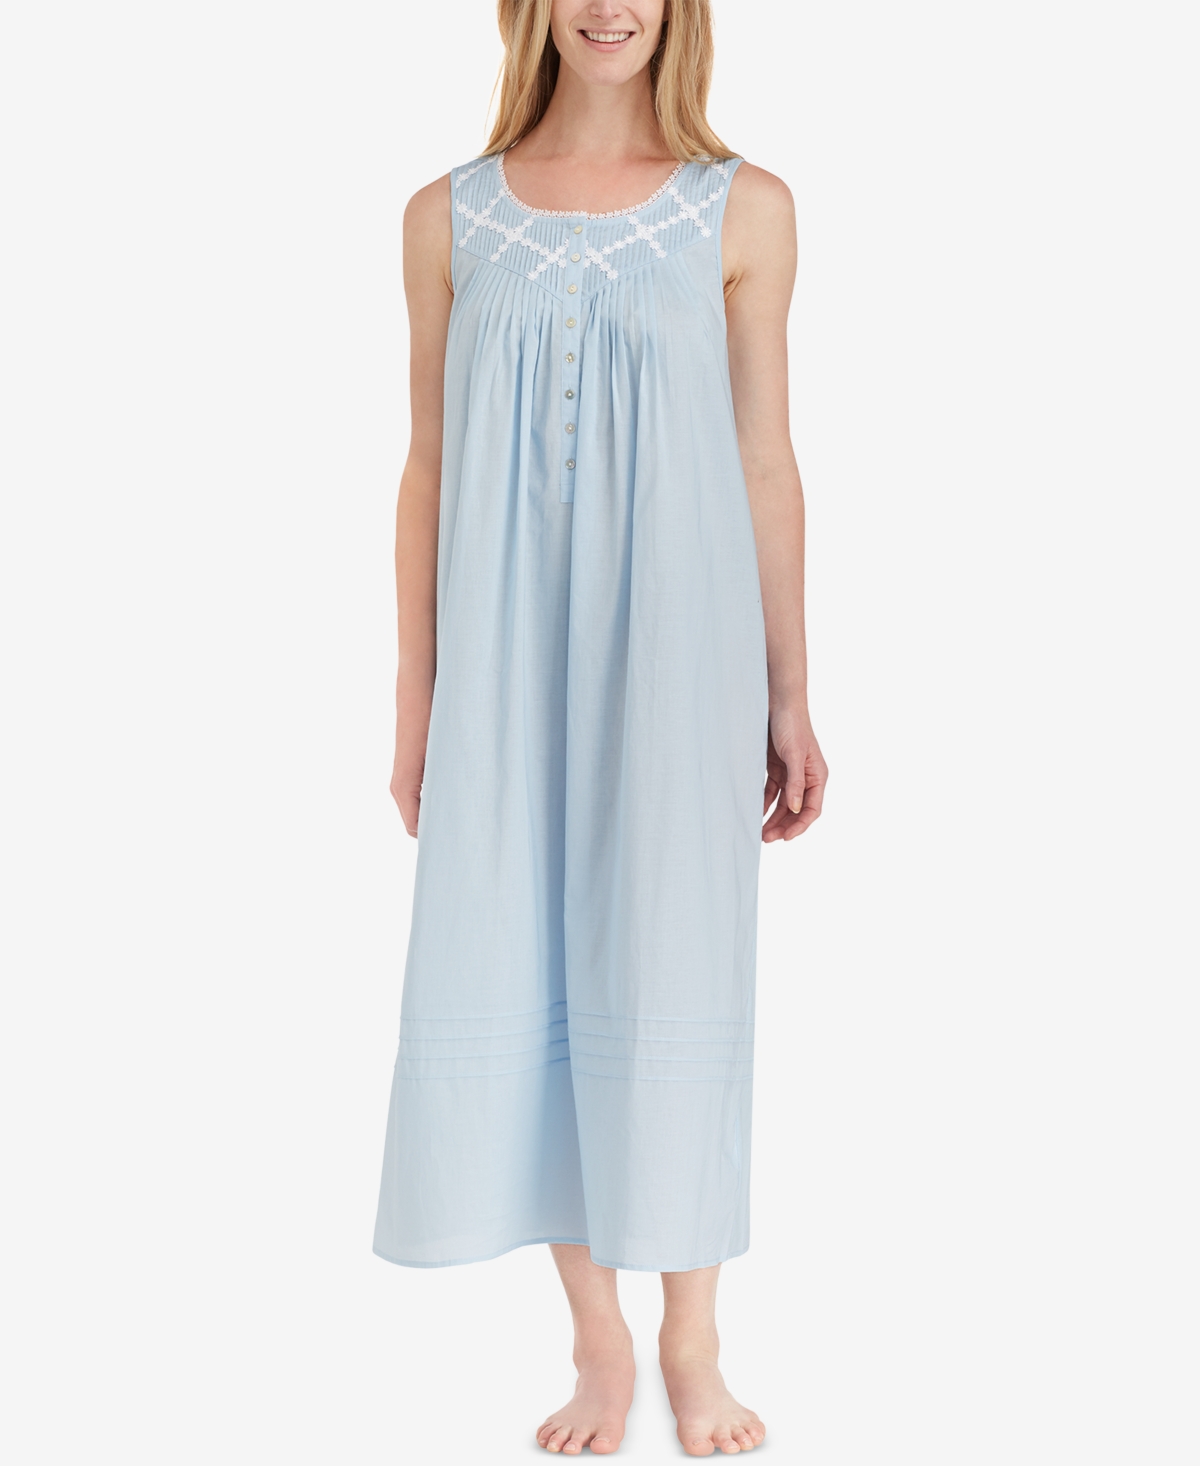 Lace-Trimmed Cotton Ballet-Length Nightgown - Blue